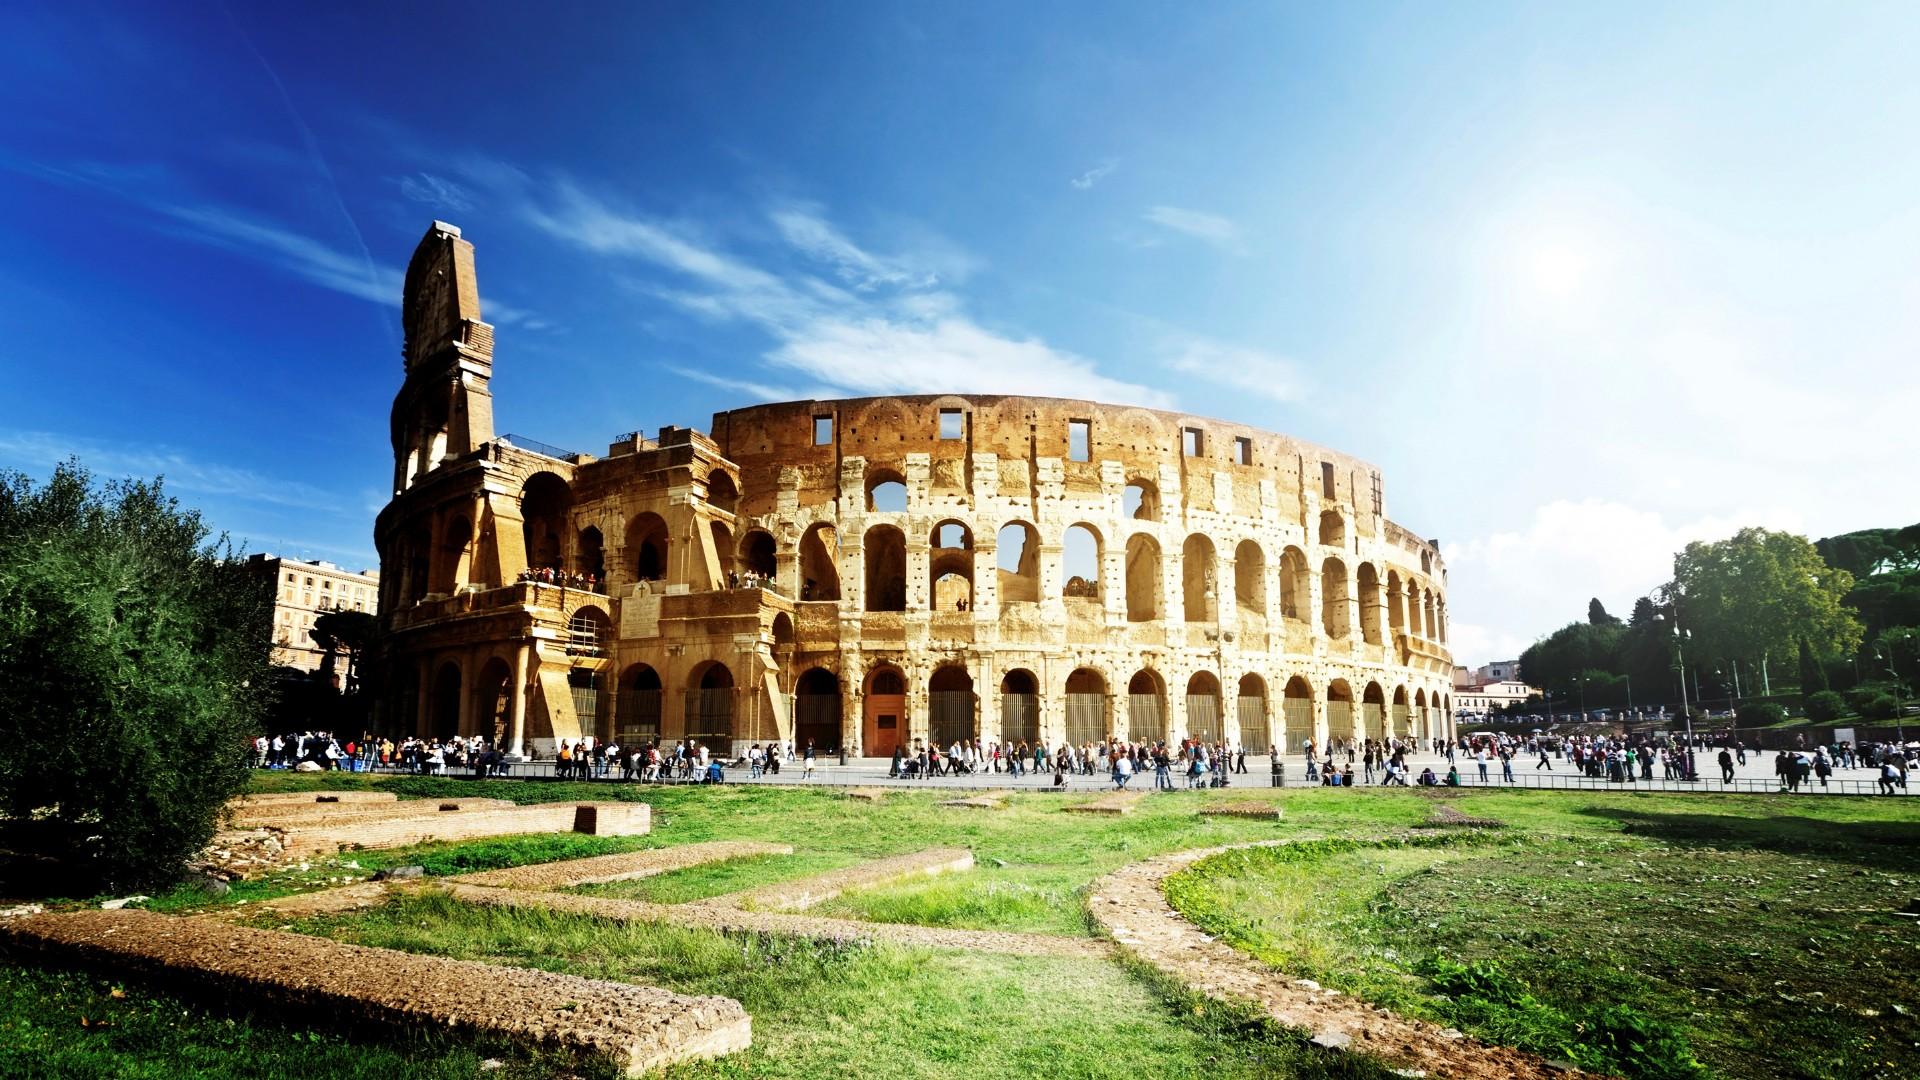 Hd Wallpaper Of The Colosseum In Rome Italy During - Europe Famous Places To Visit , HD Wallpaper & Backgrounds